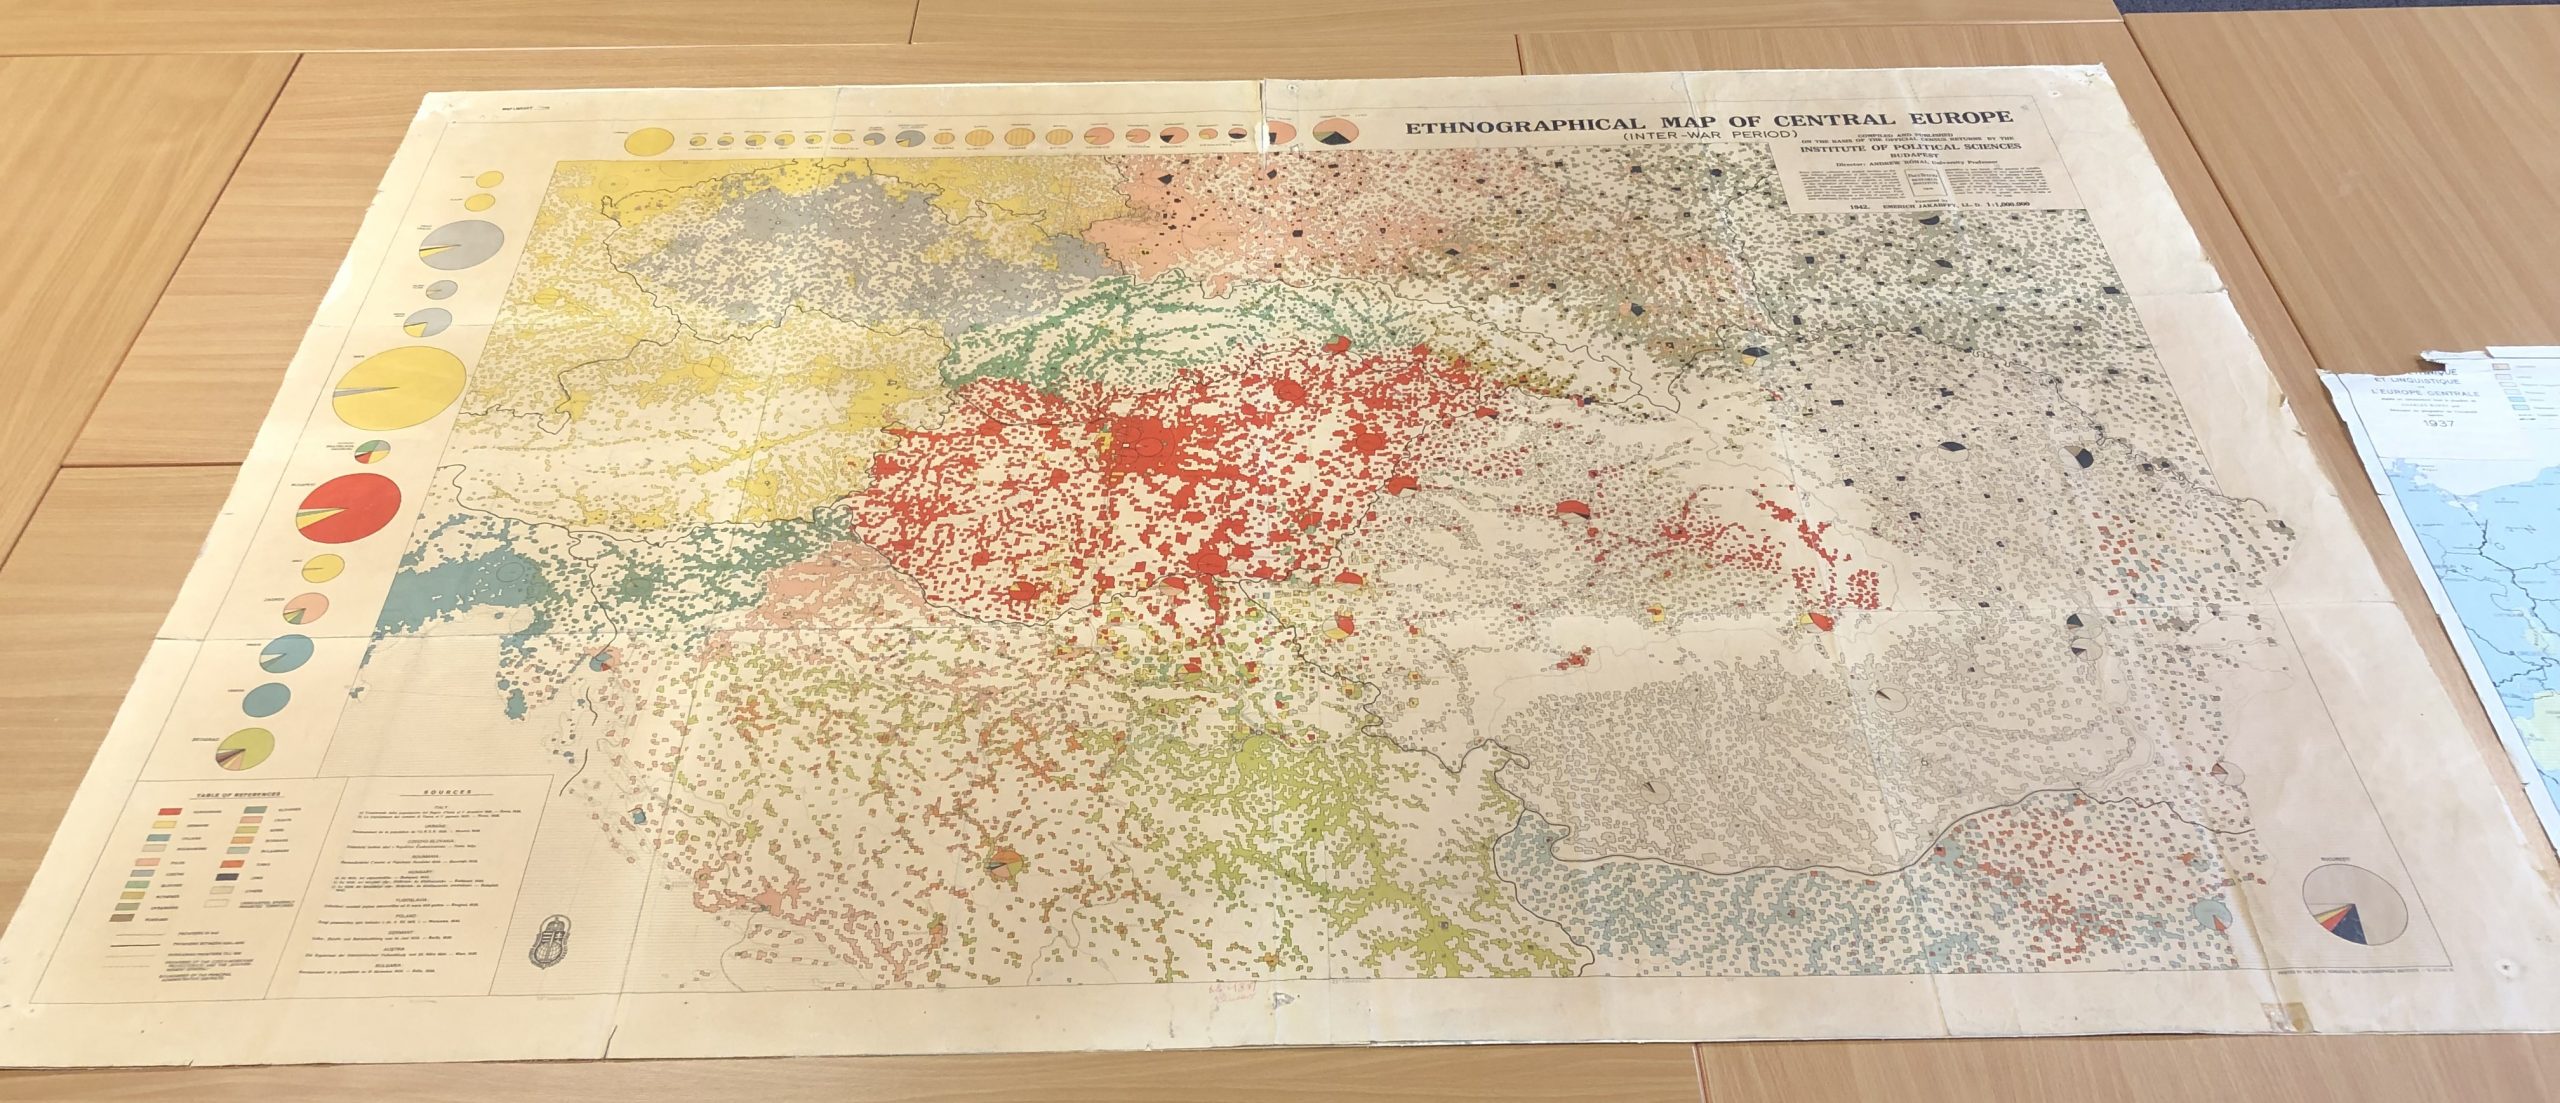 Anticipating Genocide: An Ethnographic Map of Central Europe in 1942 ...